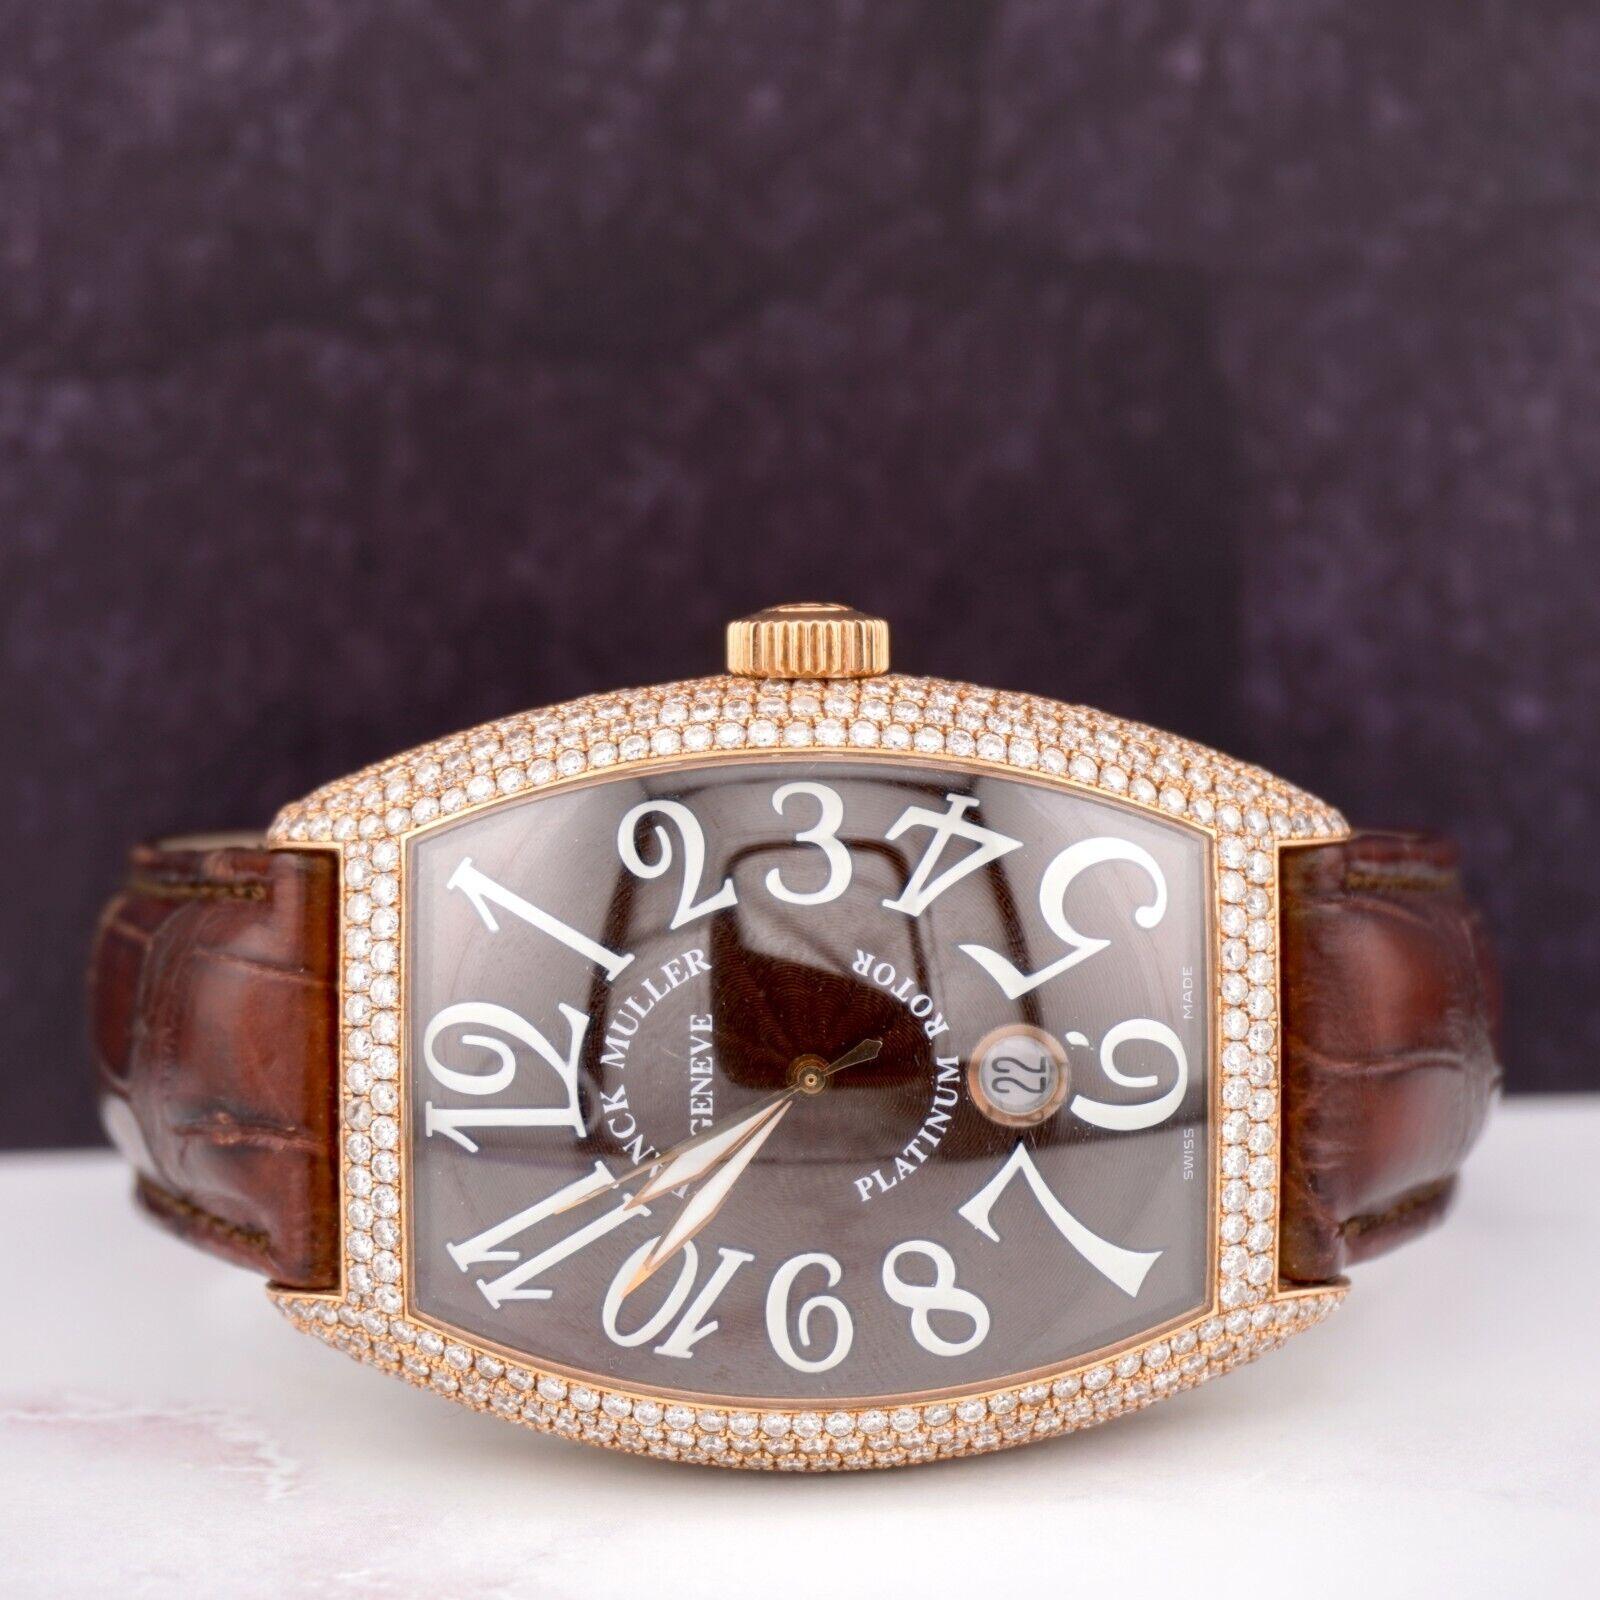 Franck Muller Casablanca Jumbo 39mm Watch. A Pre-owned watch w/ Gift Box. The Watch Itself is Authentic and Comes with Authenticity Card. Watch Reference is 8880 SC DT and is in Excellent Condition (See Pictures). The dial color is Brown is and